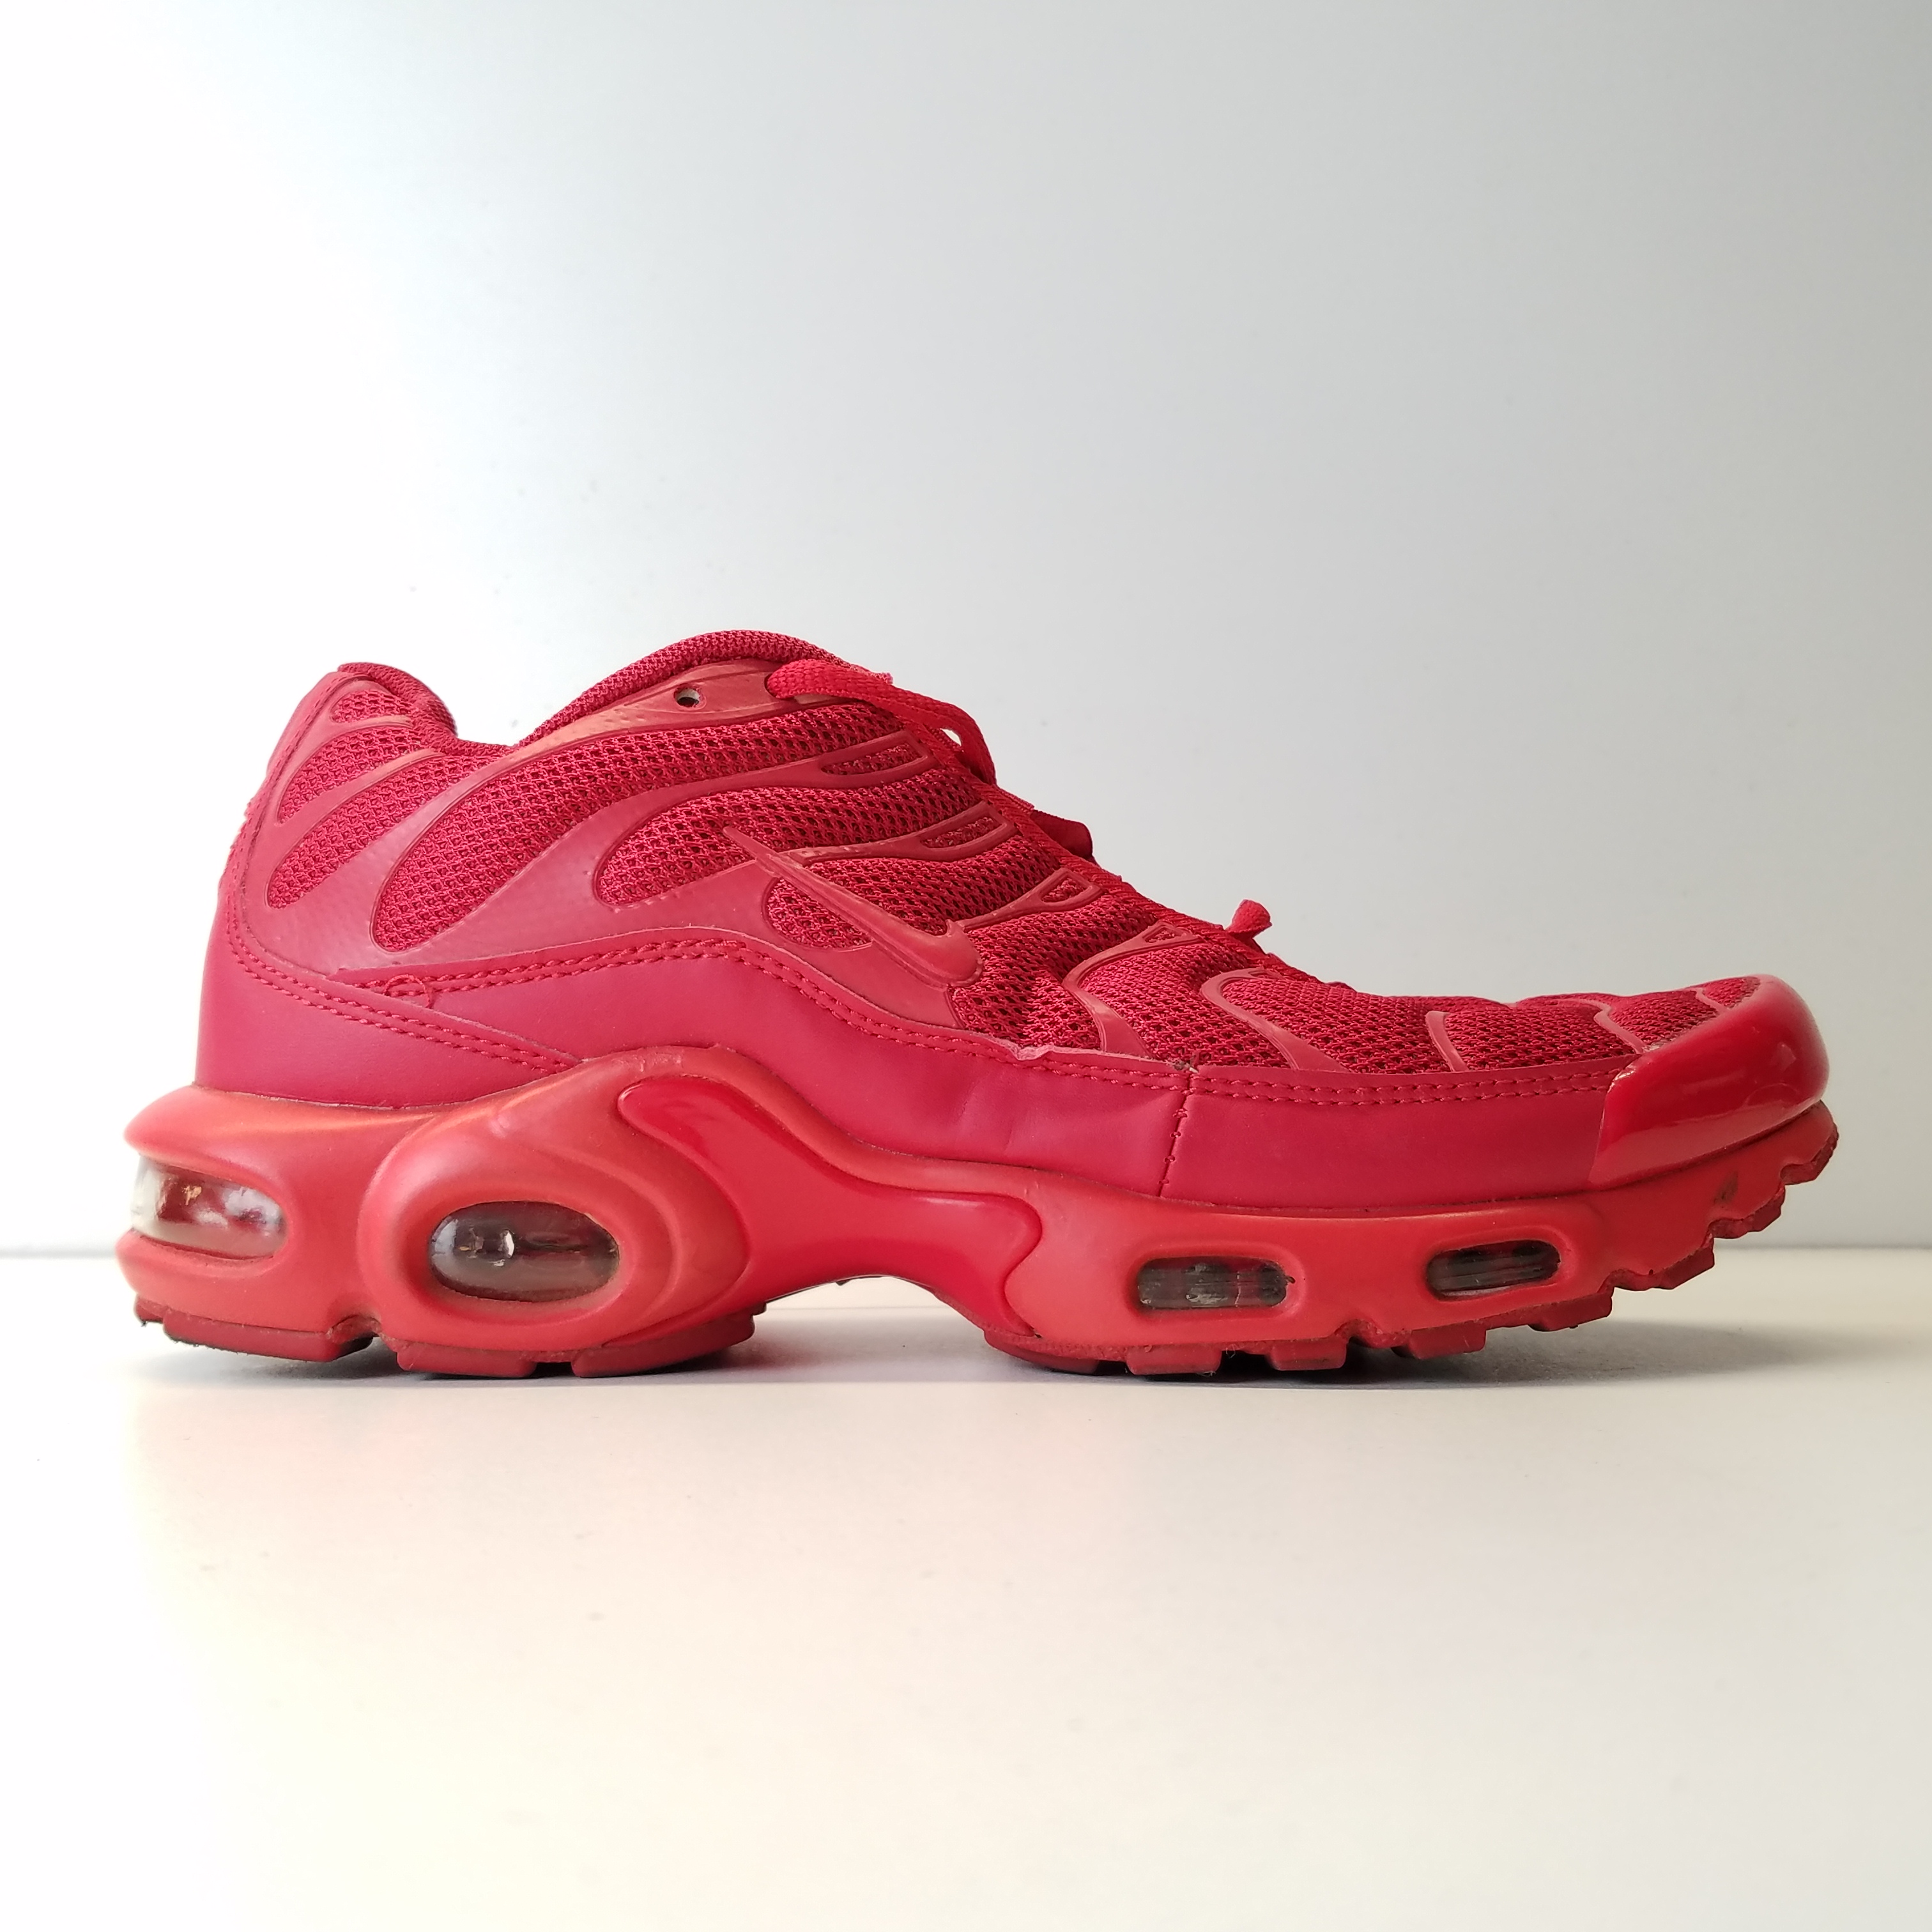 Dolor construcción naval sin Buy the Nike Air Max Plus TN University Lava Red Size 7 Running |  GoodwillFinds